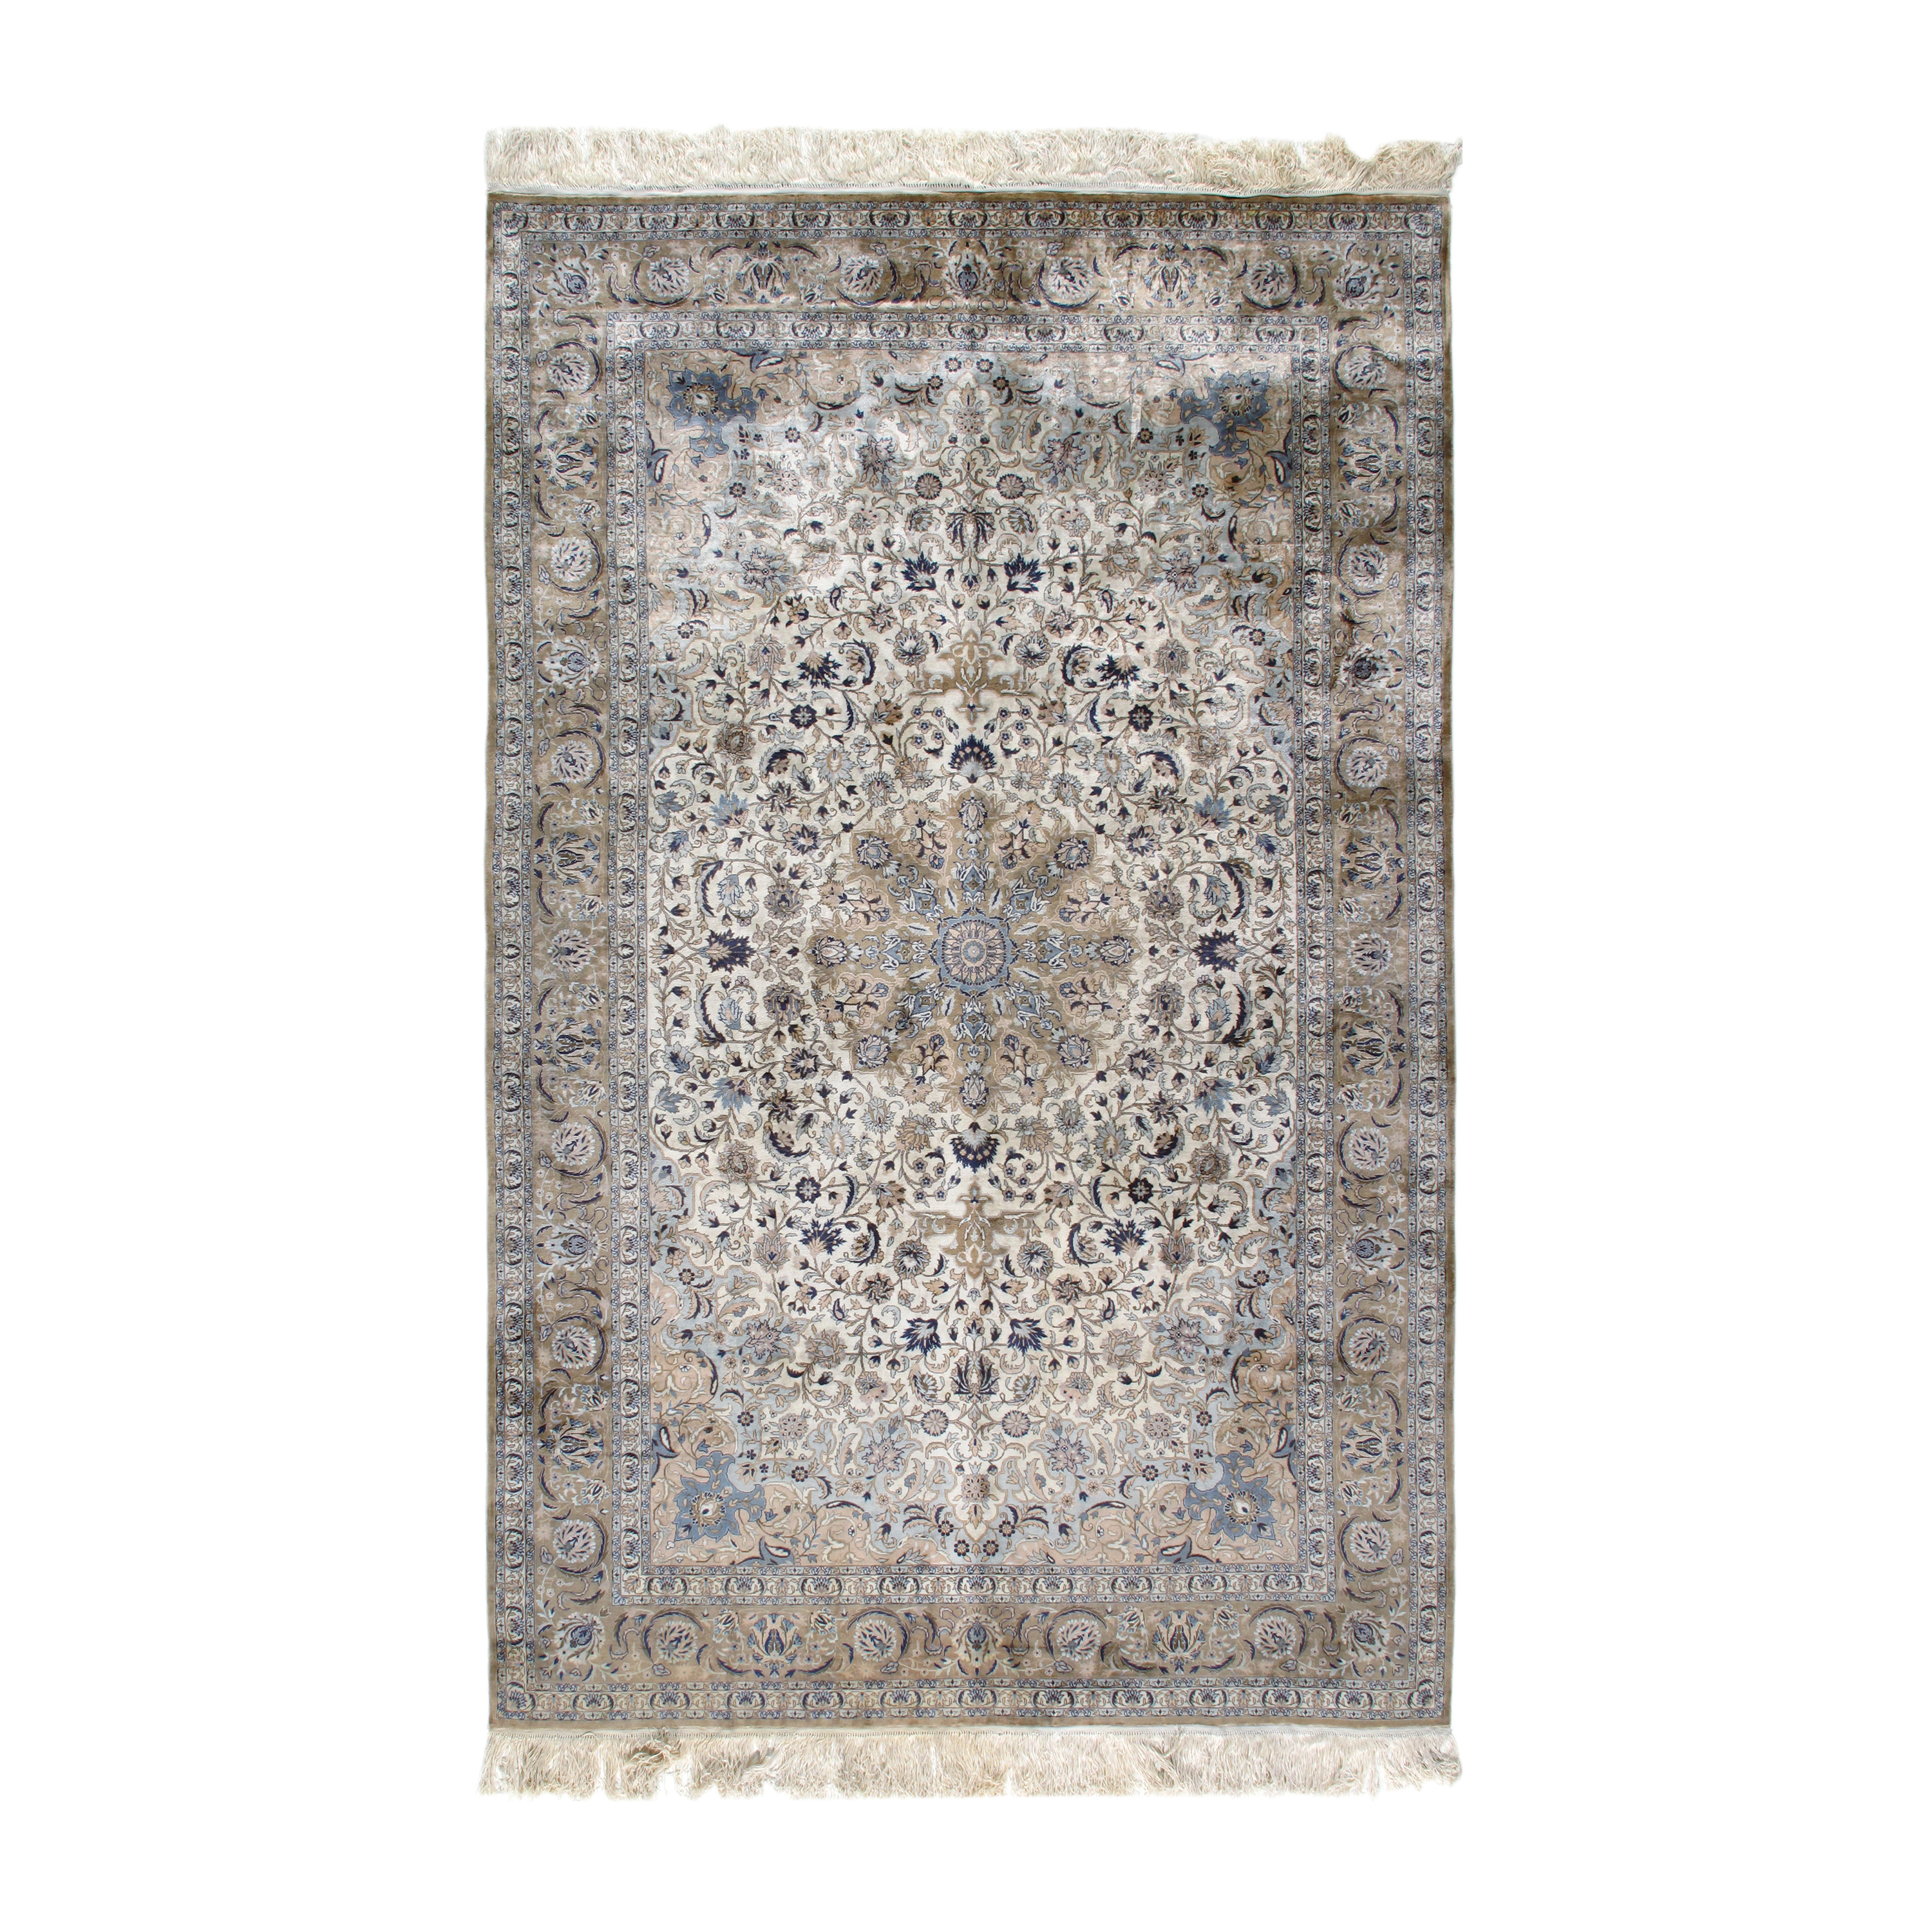 This Vintage Chinese Silk rug is crafted with natural tones that resembles Persian Qum rugs.